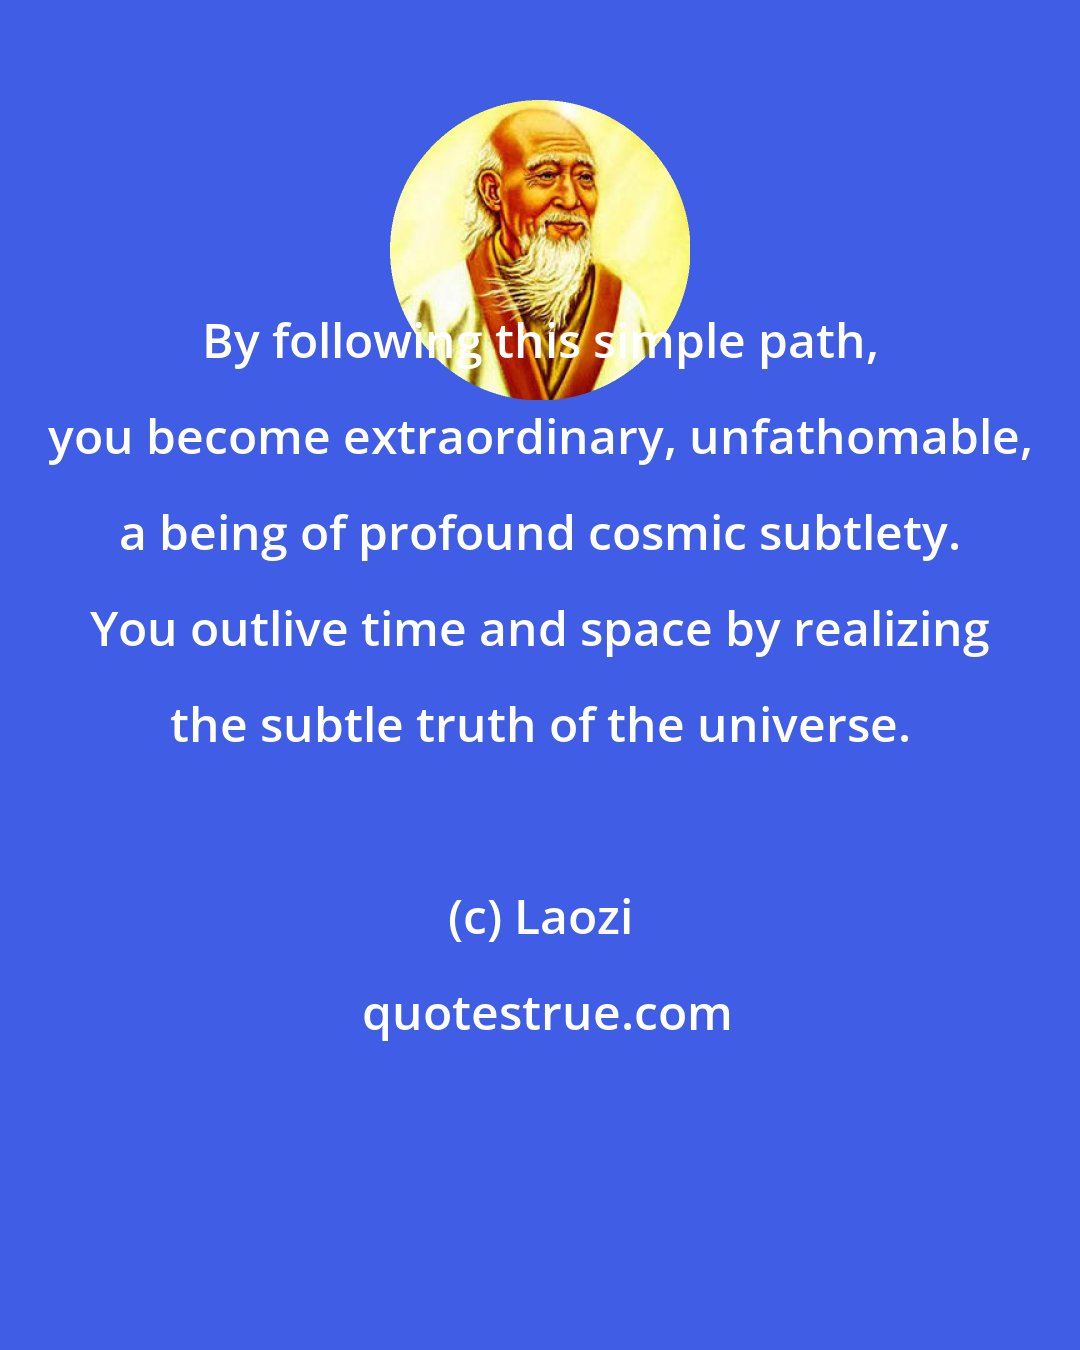 Laozi: By following this simple path, you become extraordinary, unfathomable, a being of profound cosmic subtlety. You outlive time and space by realizing the subtle truth of the universe.